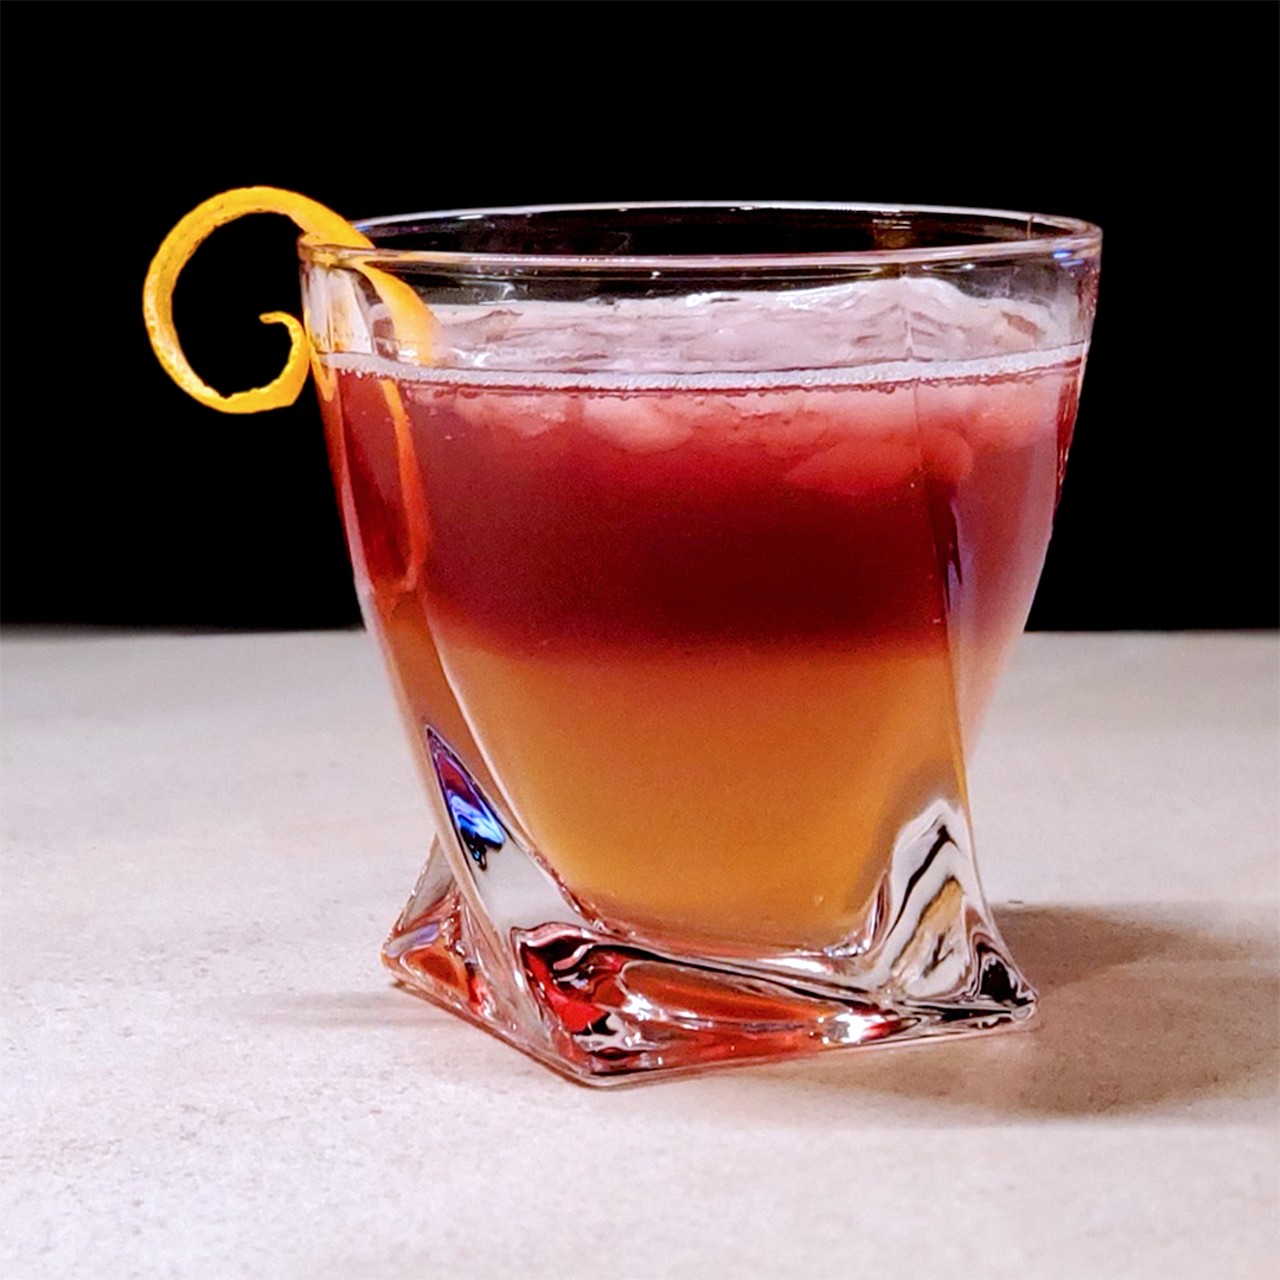 Team Muzzarelli's Jack Daniel's Rye "Eastside Sour"
Ingredients:
- 2 oz Jack Daniel's Rye 
- 2.5 oz Sour mix*
- 2-3 dash orange bitters
- Shake and pour over ice
- Layer over .5 oz of your favorite sangria and garnish with expressed orange peel 
*Sour mix: Equal parts simple syrup & lemon juice